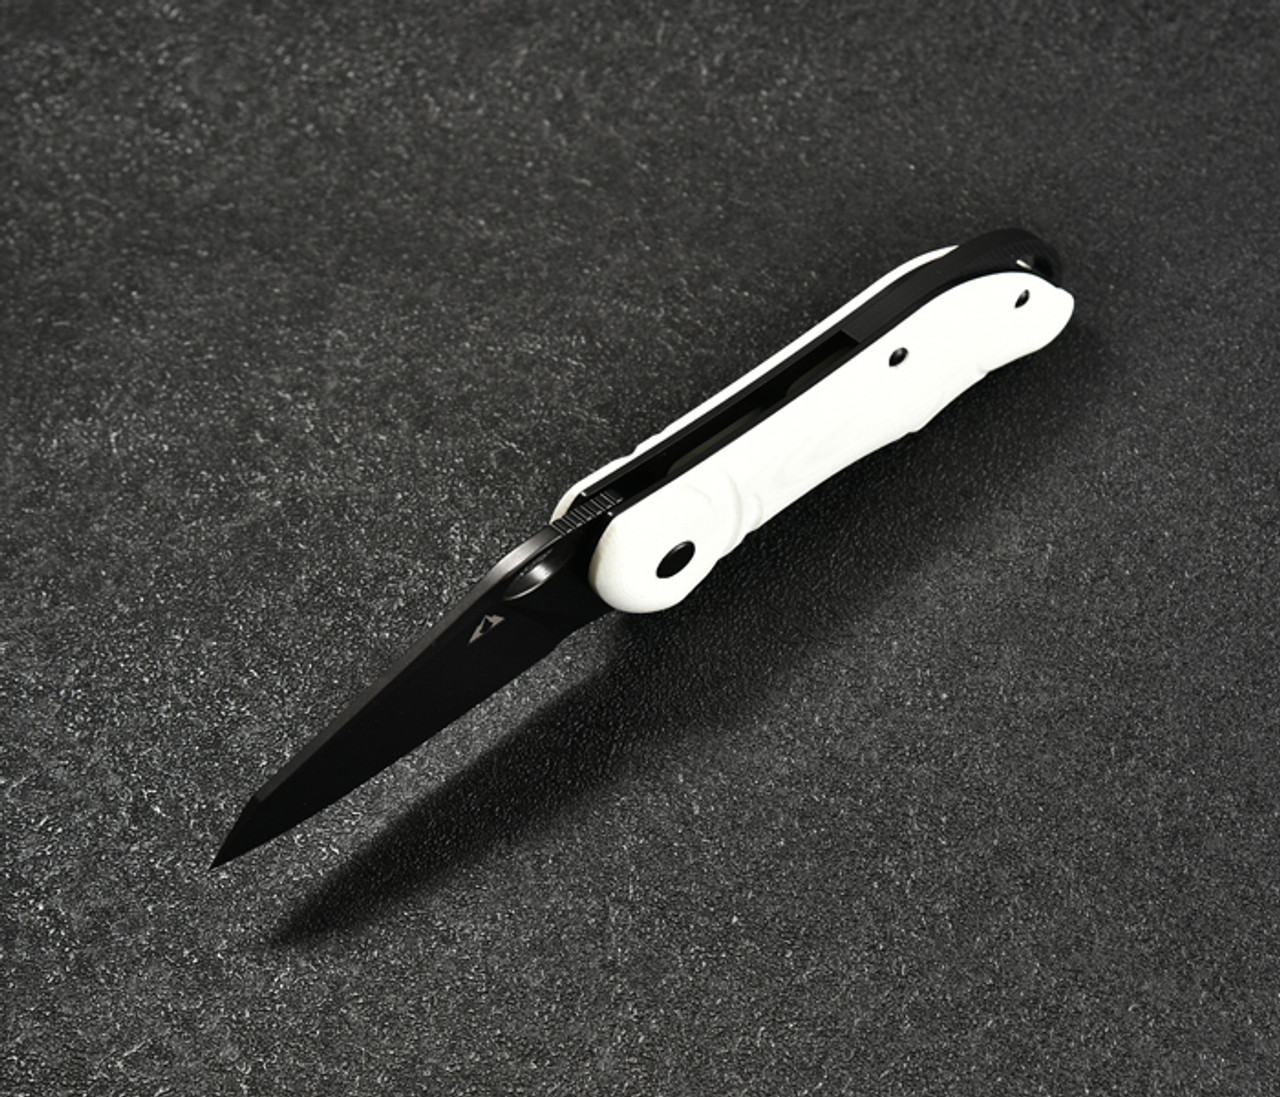 CMB Hippo Folding Knife (CMB05W) 2.99 in Black D2, White G-10 Handle